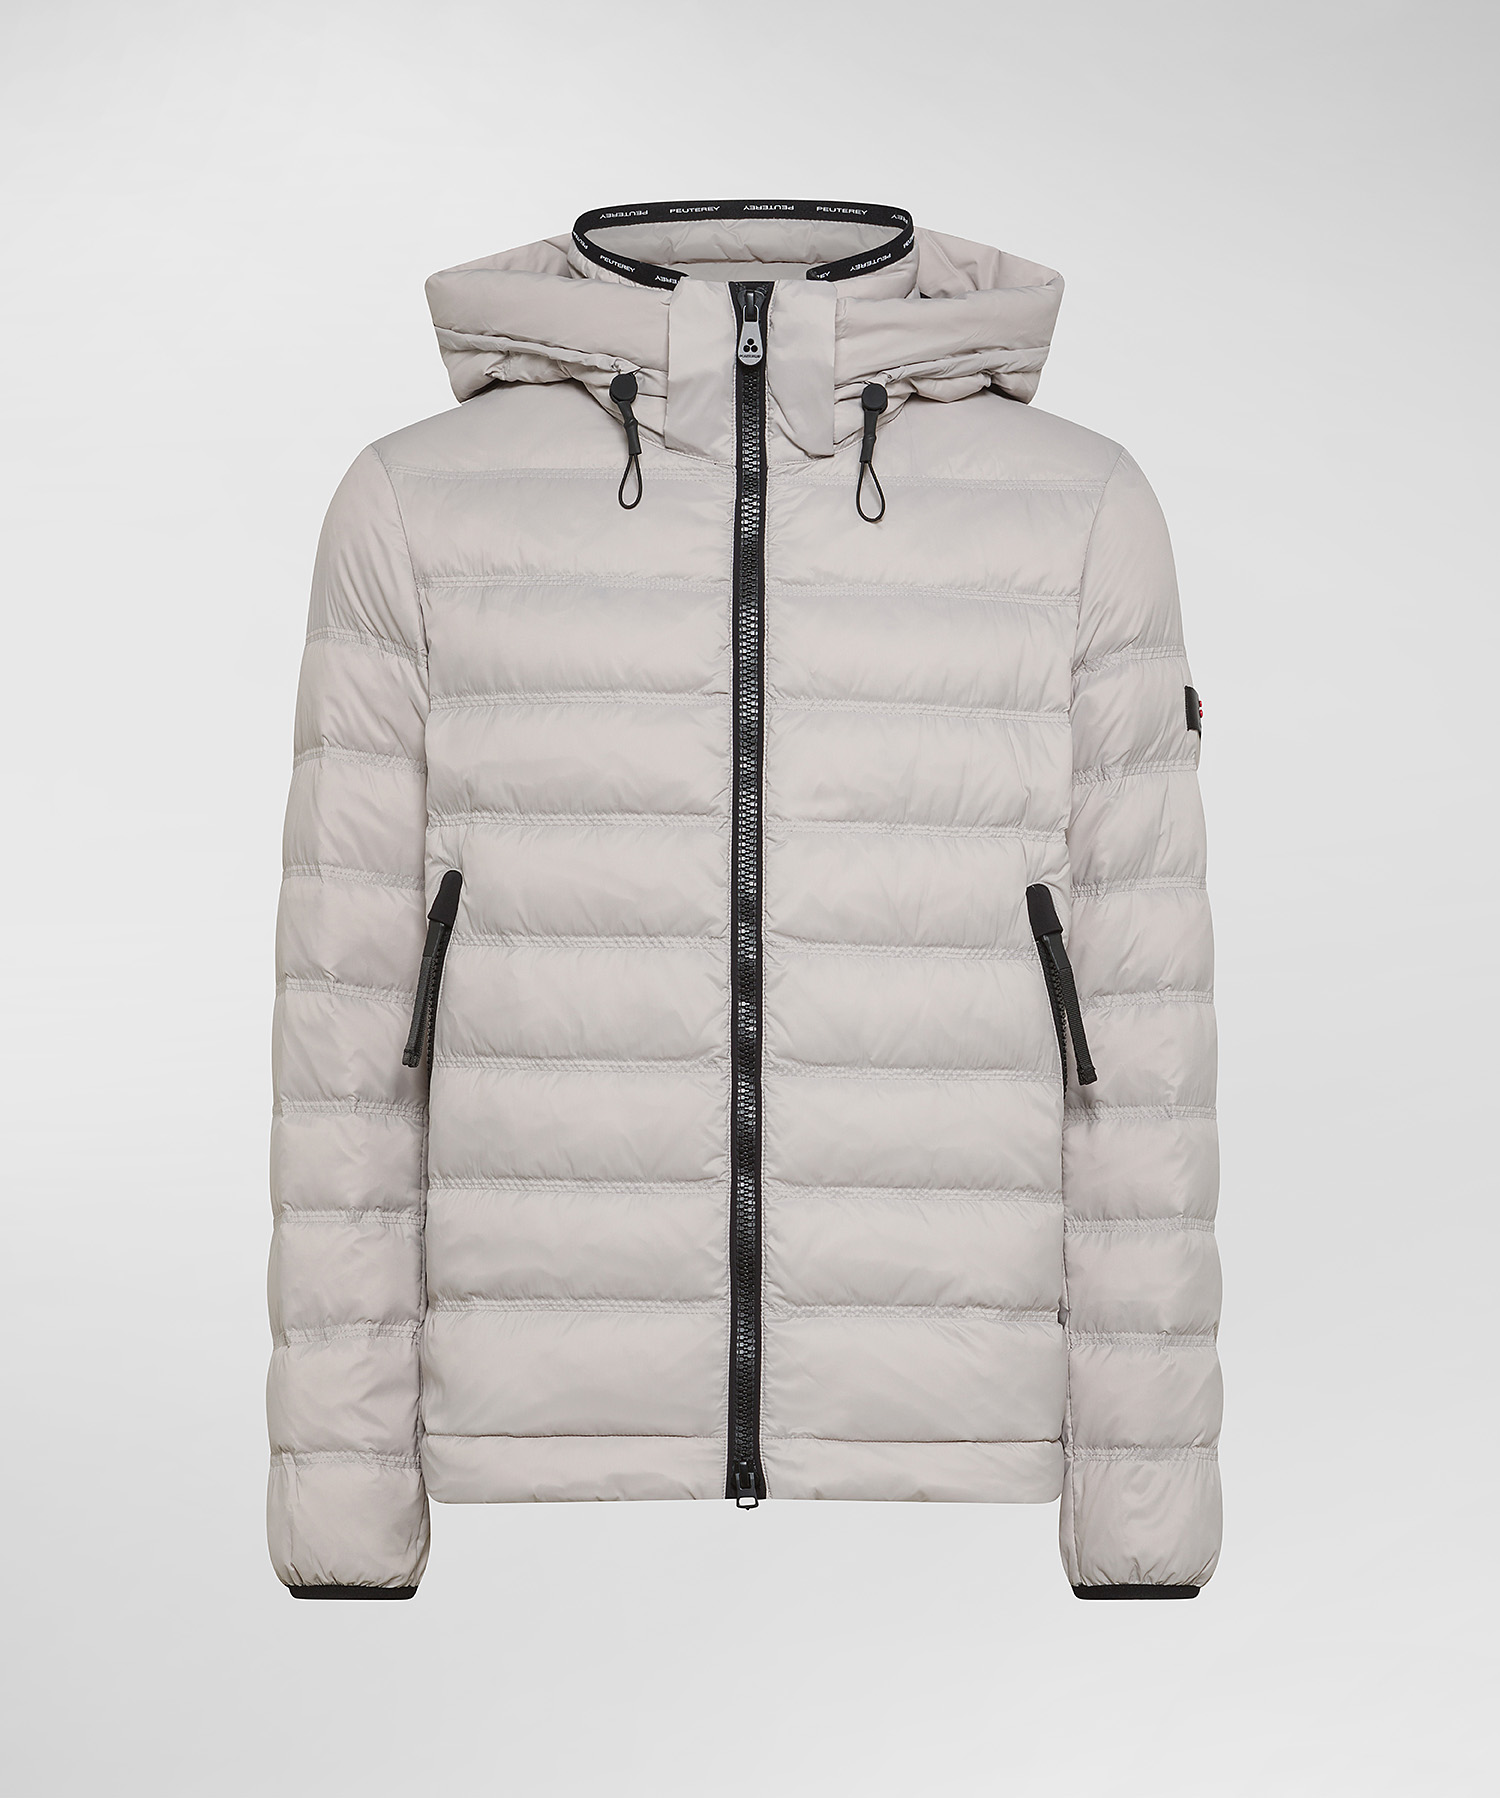 Peuterey – Boggs KN Jacket – Off-white